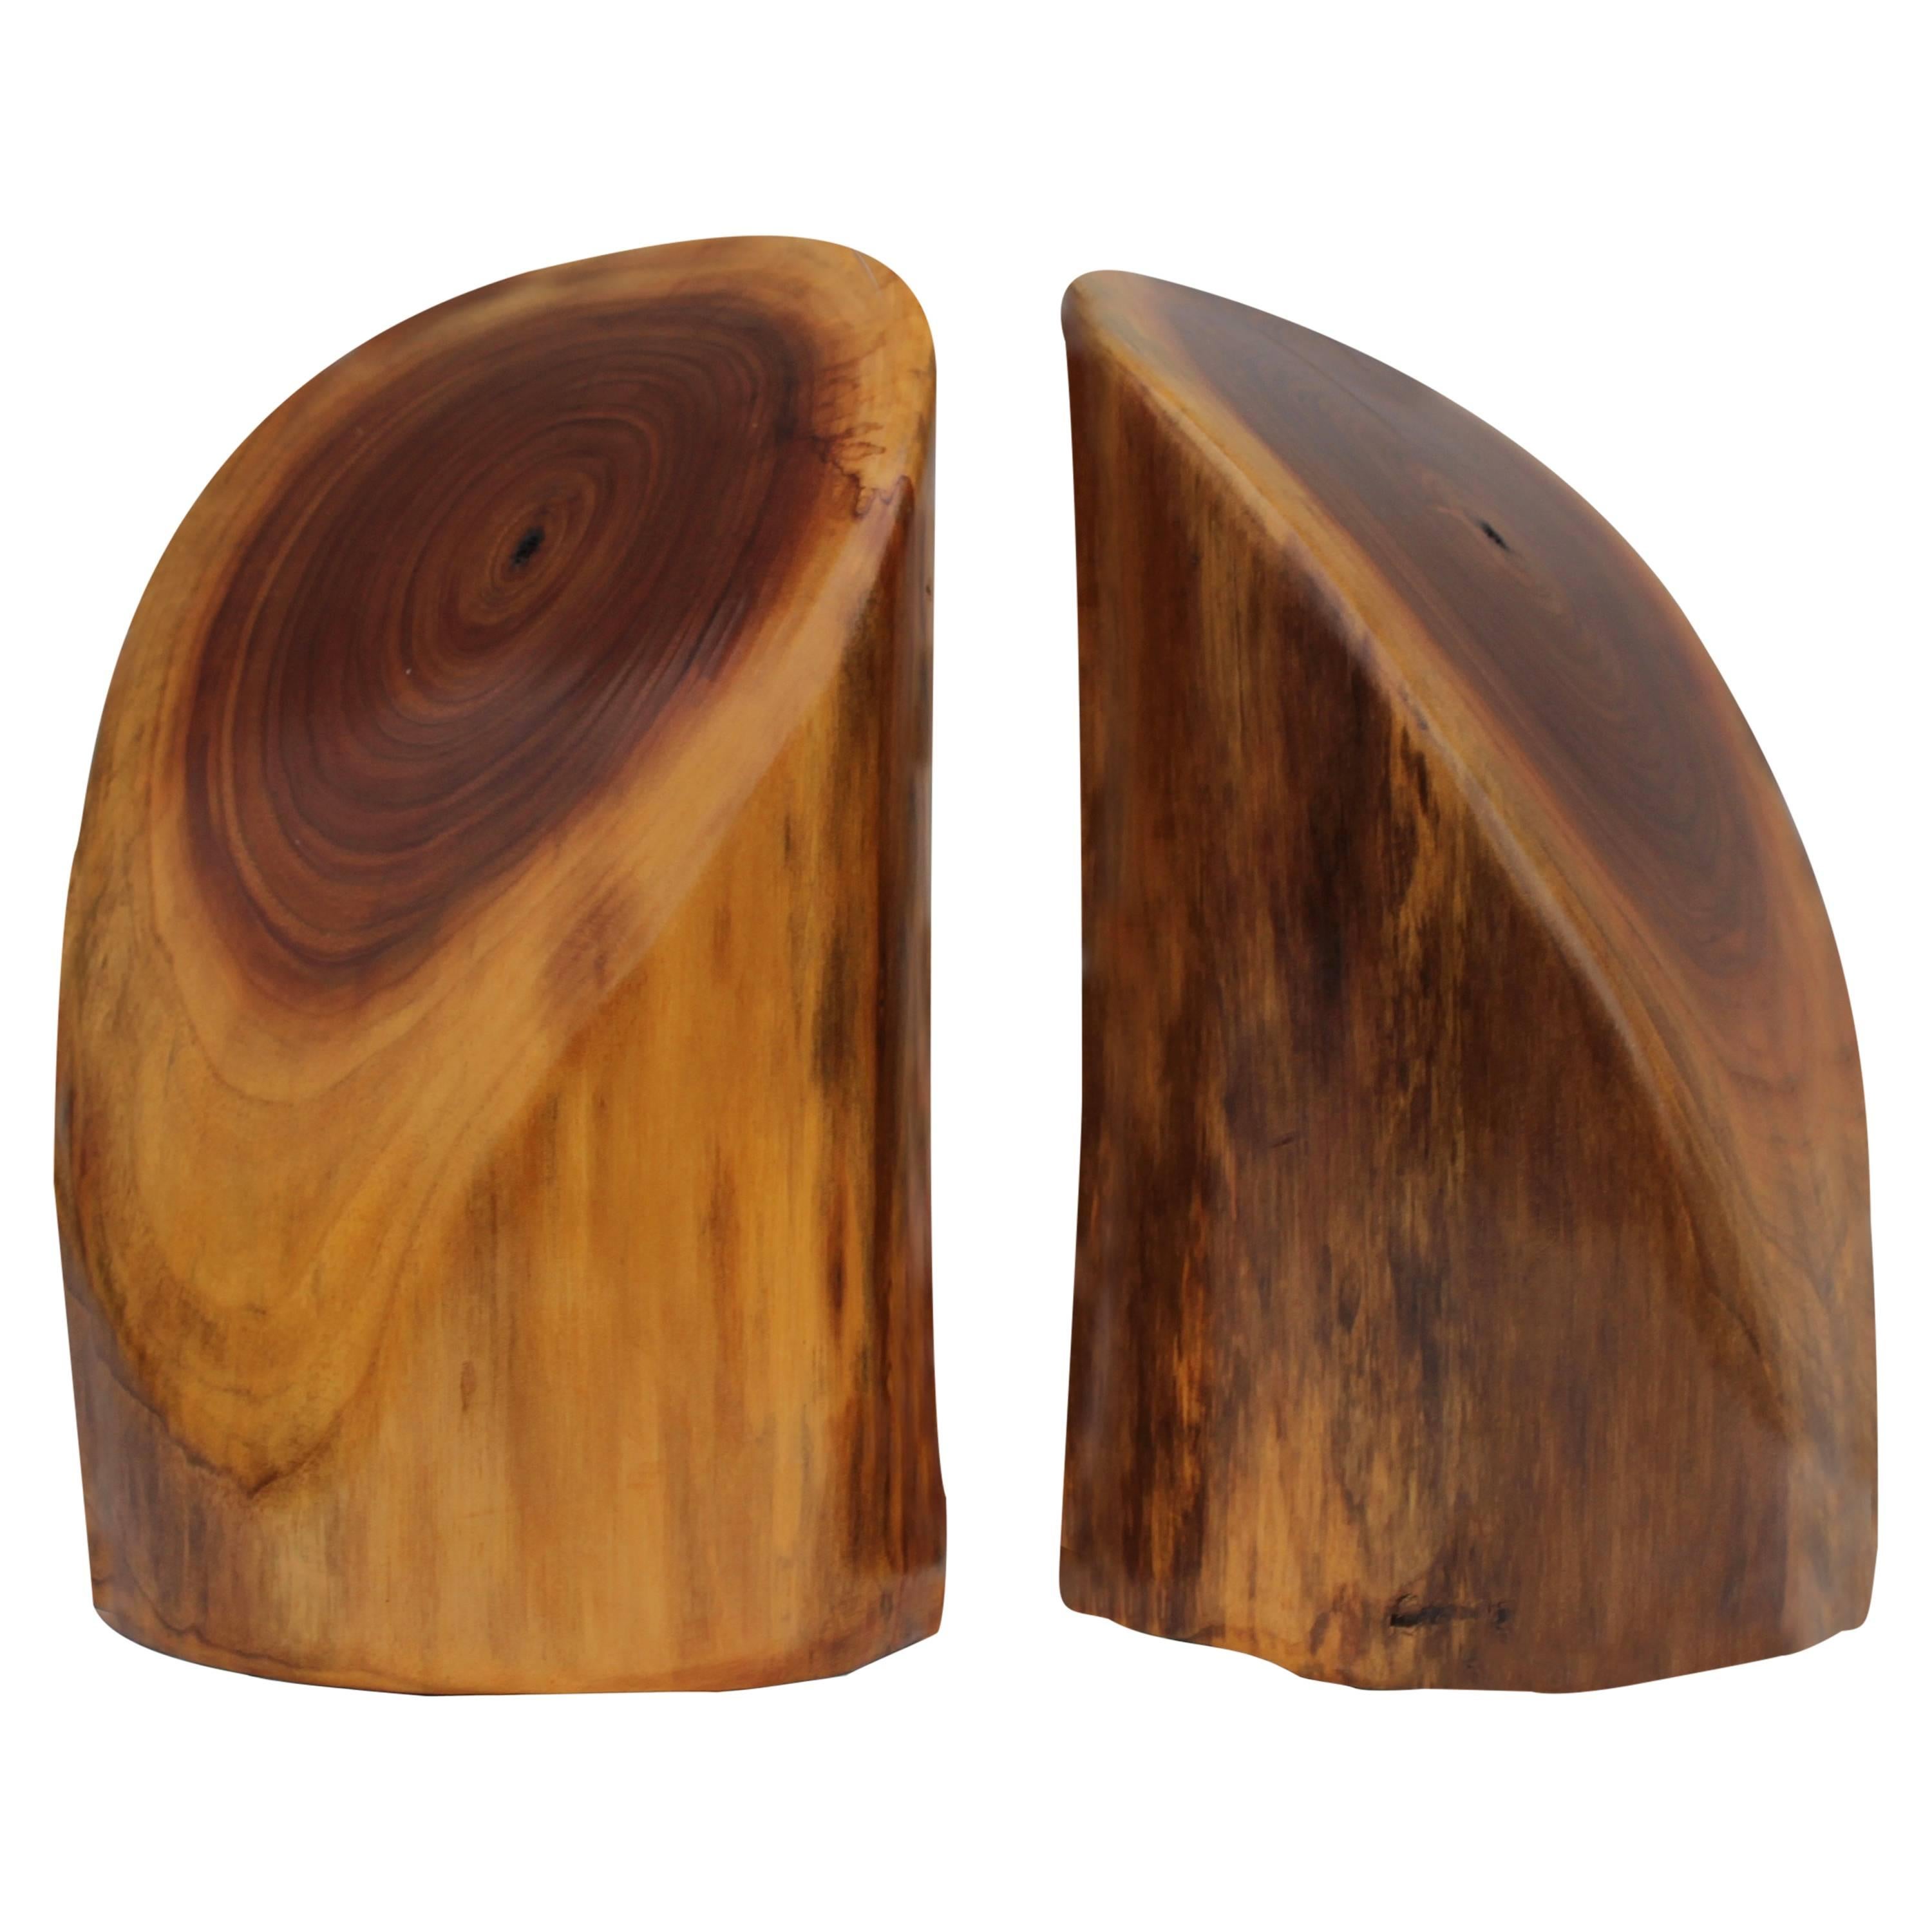 Pair of Don Shoemaker Style Wood Bookends